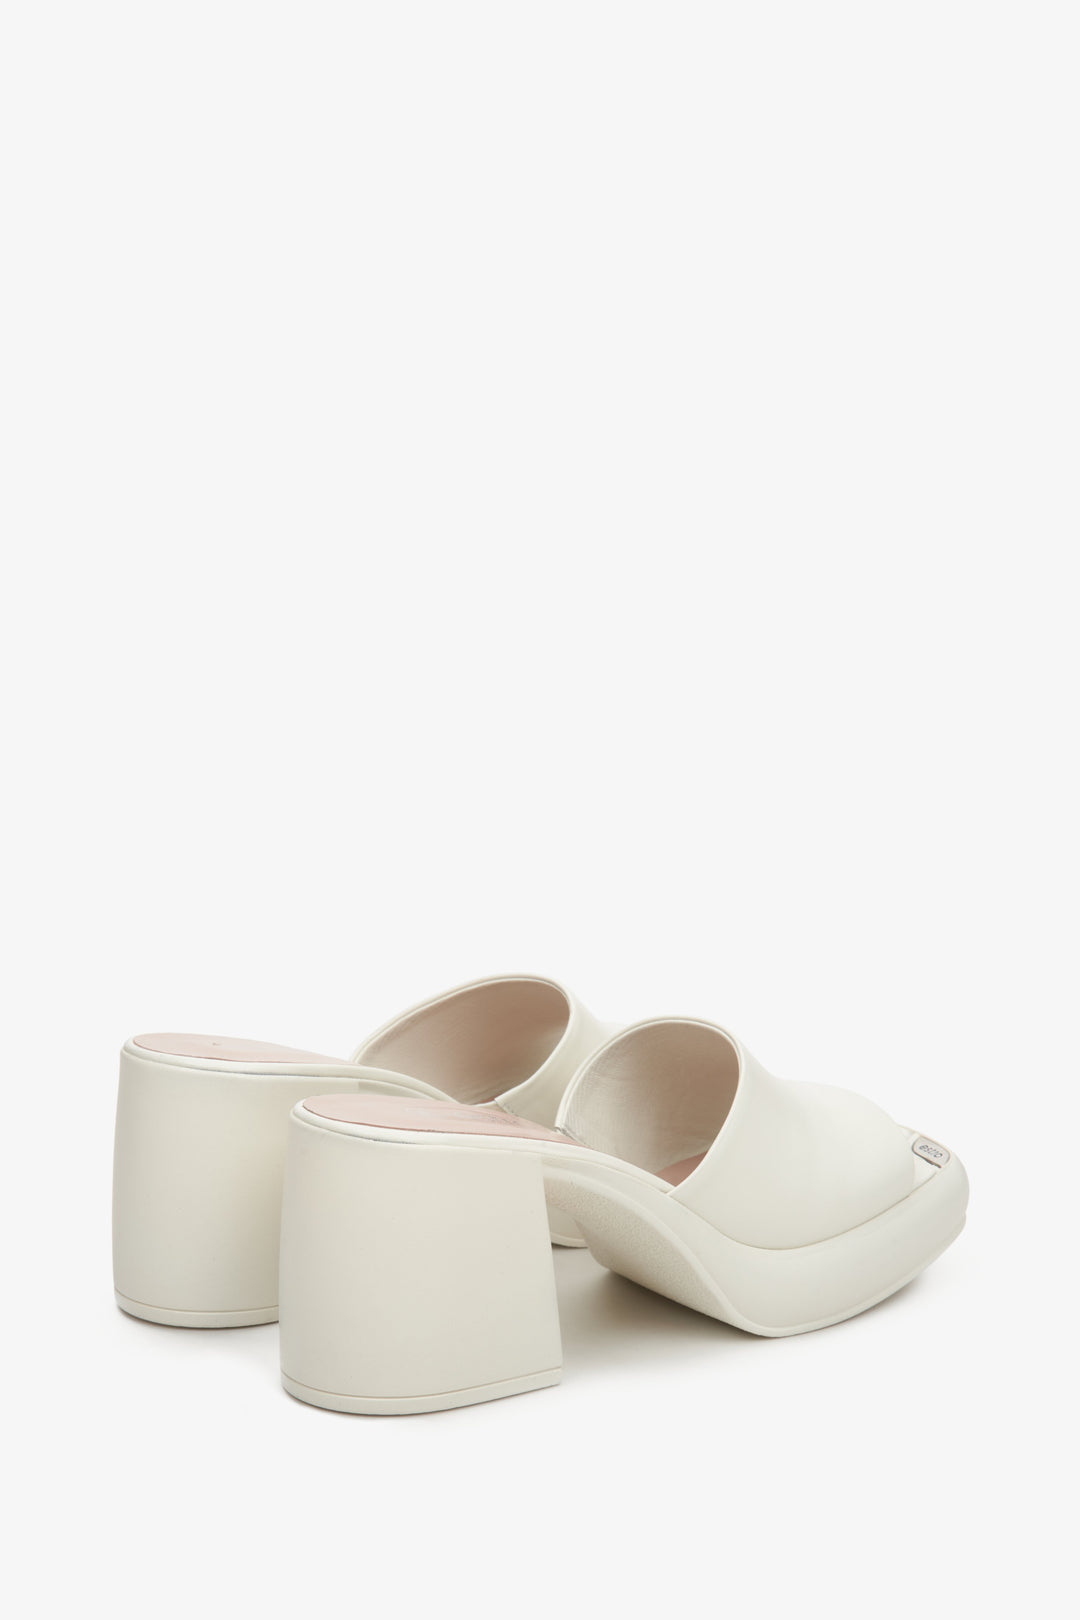 Women's white mules with a square heel - a close-up of the back of the shoes.